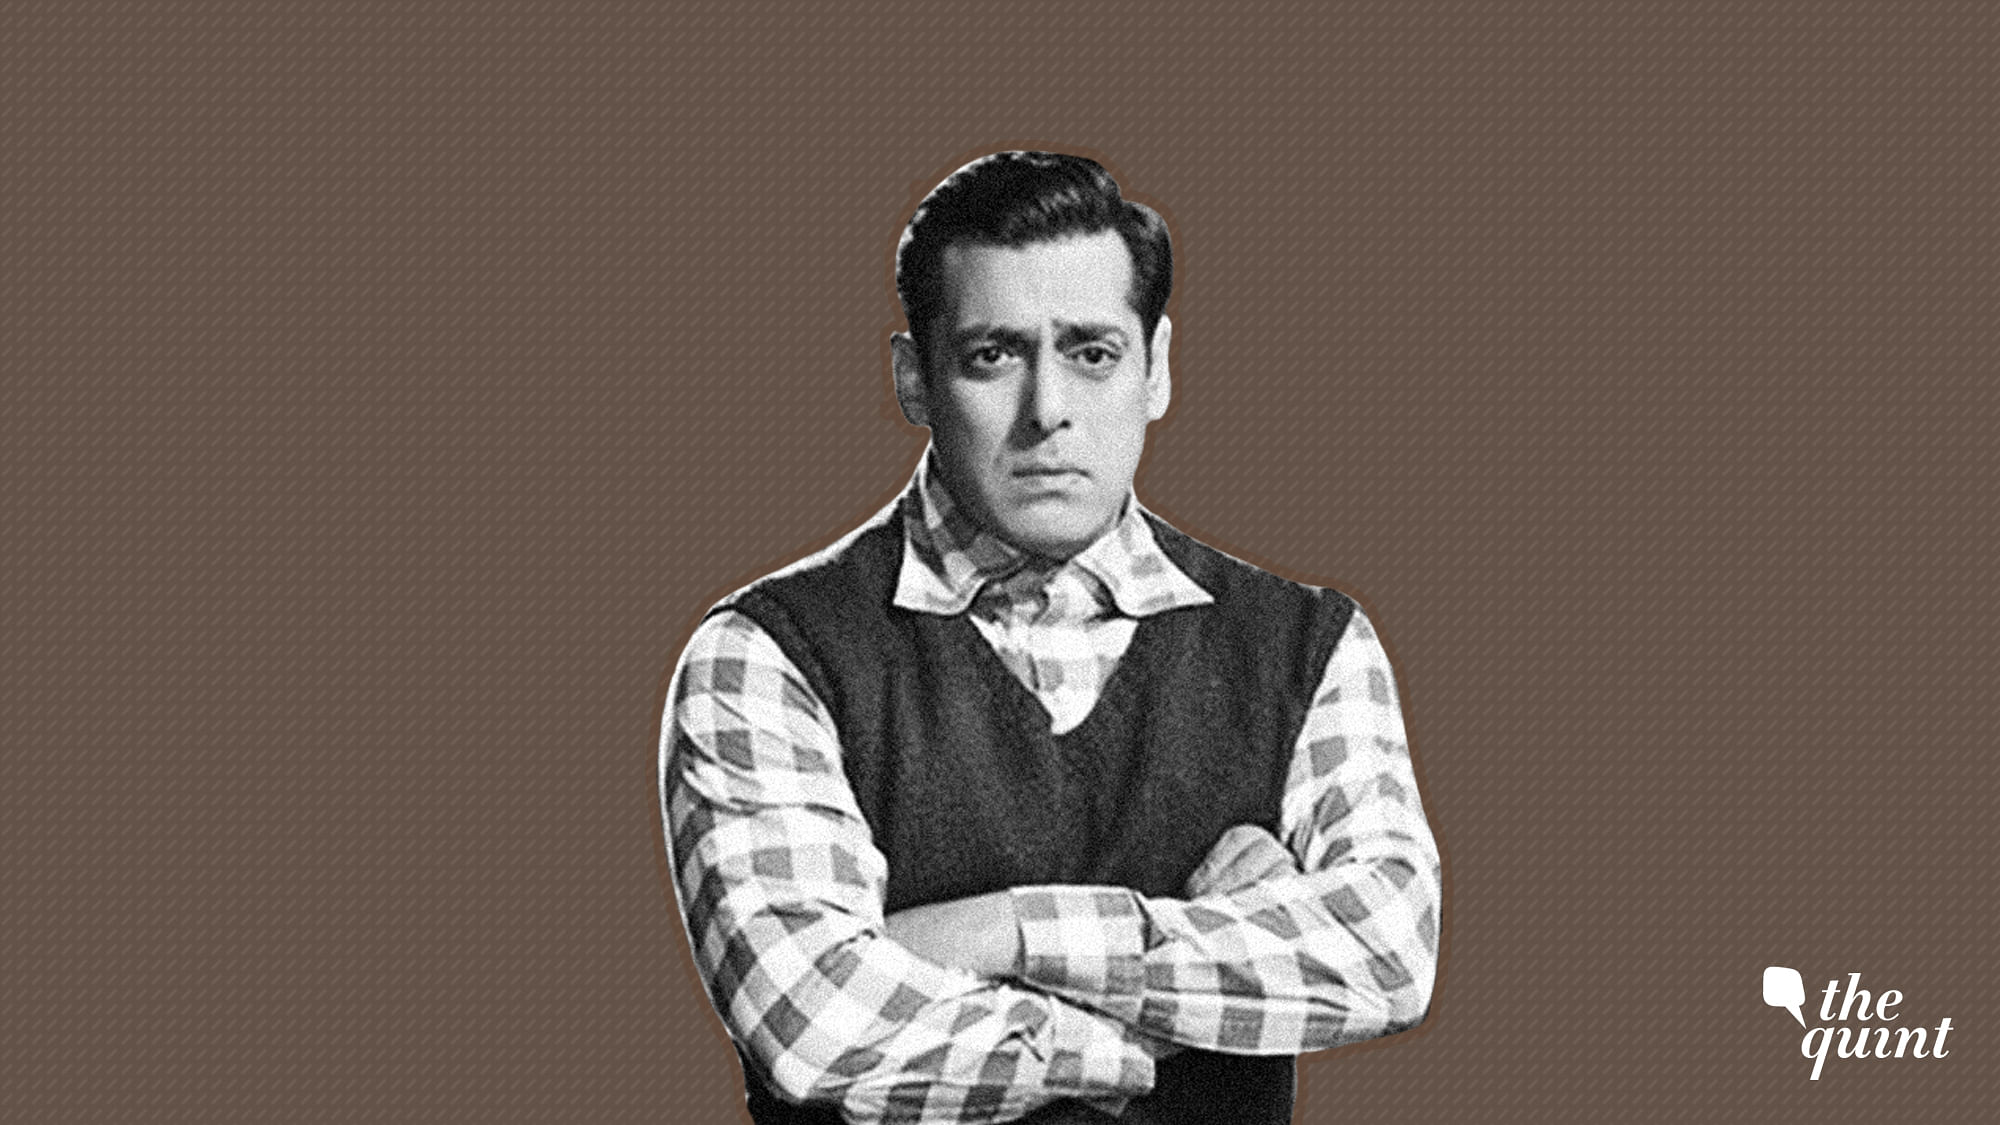 Salman Khan faces up to 6 years in jail.